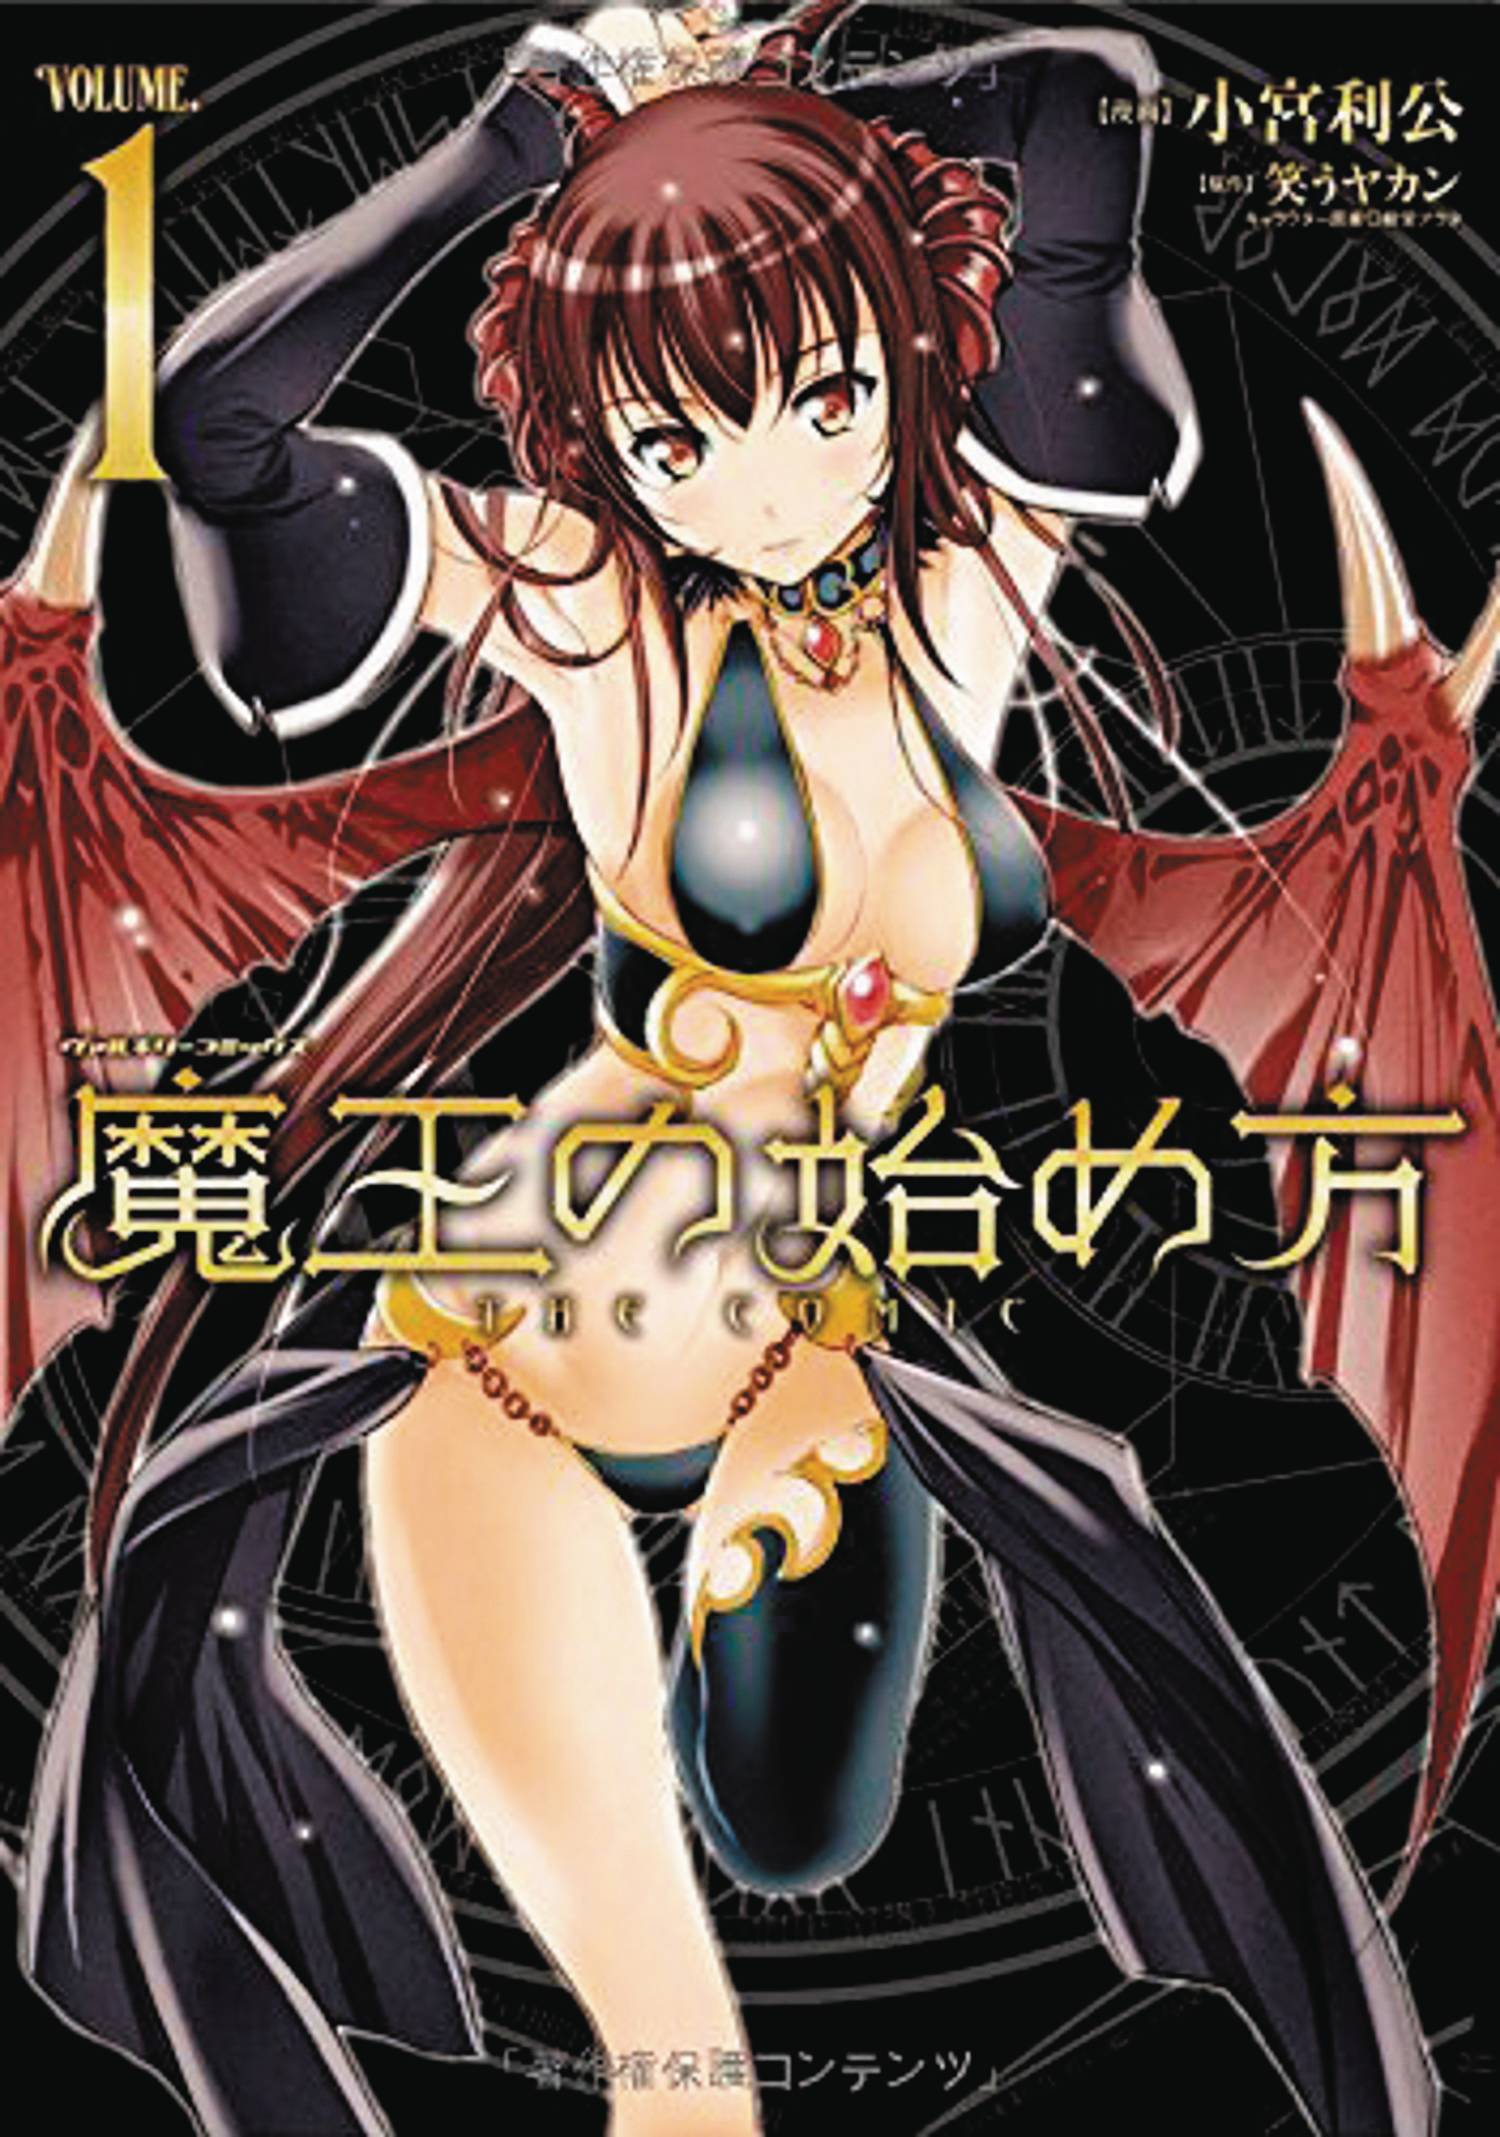 HOW TO BUILD DUNGEON BOOK OF DEMON KING GN VOL 01 (MR)